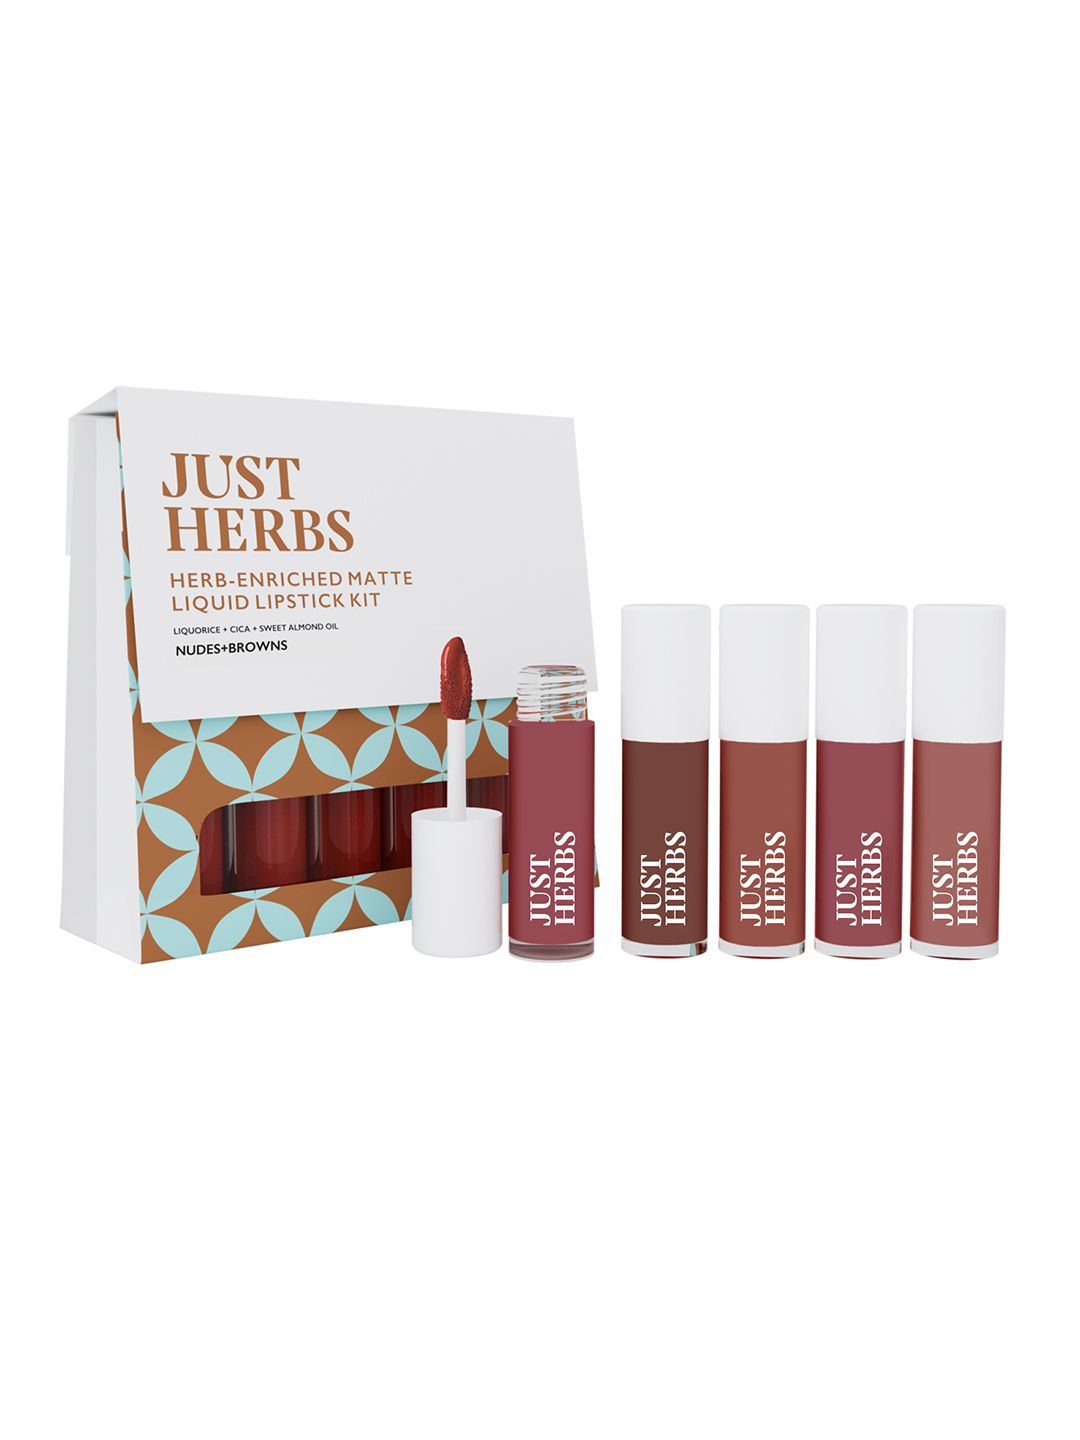 Just Herbs Mini Herb-Enriched Matte Liquid Lipstick Kit - Set of 5 - Nudes & Browns Price in India